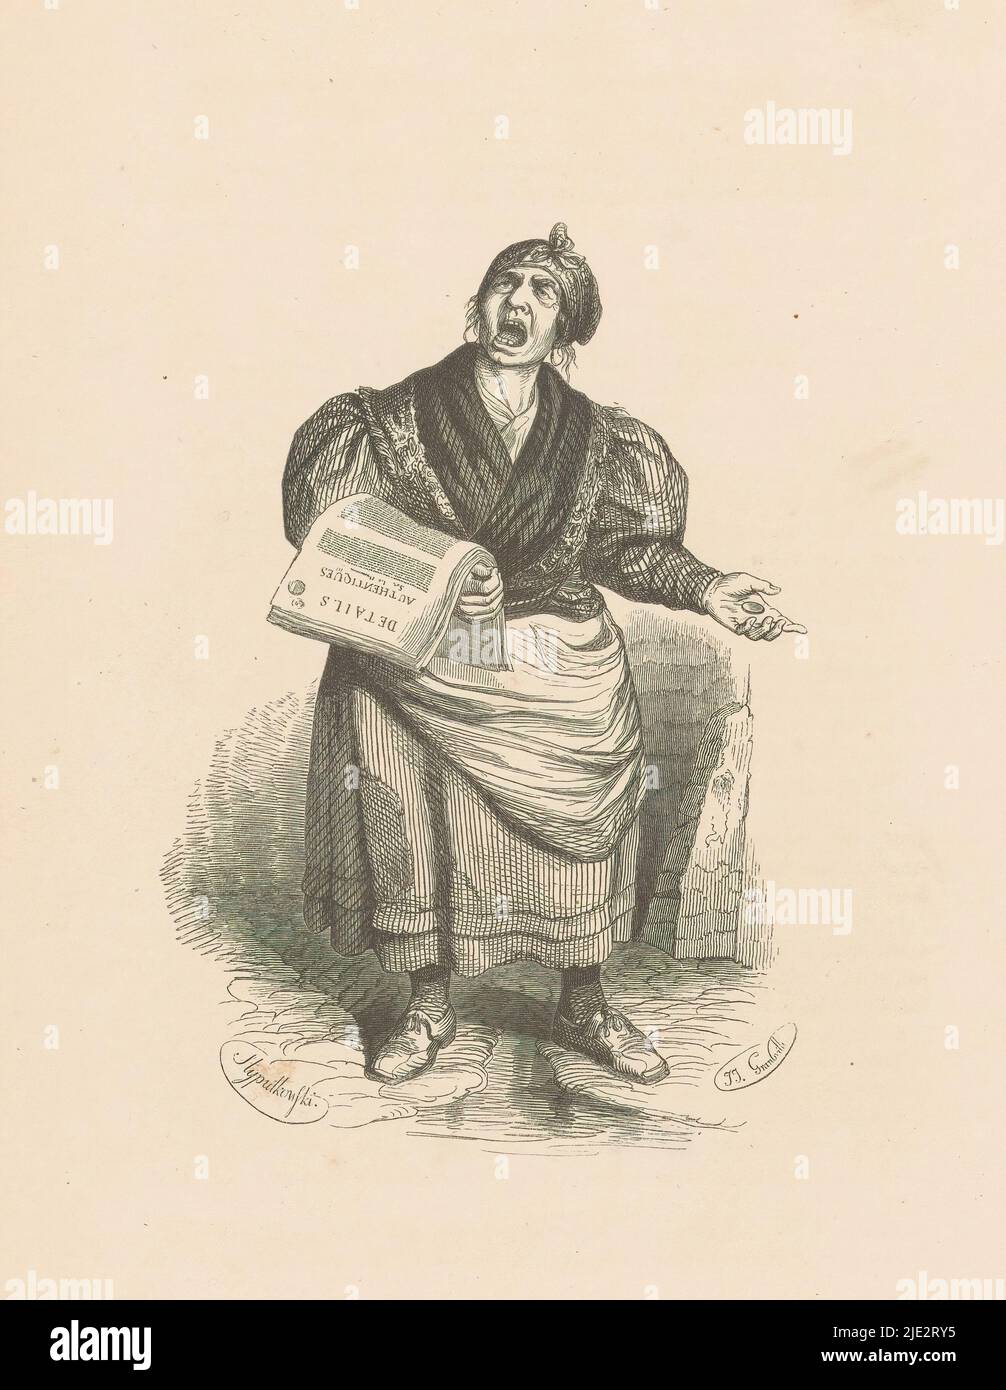 Newspaper Seller, On the street stands a woman wearing a headscarf. Over her right arm is a stack of newspapers., print maker: Lucien Xavier Stypulkowski, (mentioned on object), after design by: Jean Ignace Isidore Gérard Grandville, (mentioned on object), 1816 - 1849, paper, height 258 mm × width 175 mm Stock Photo